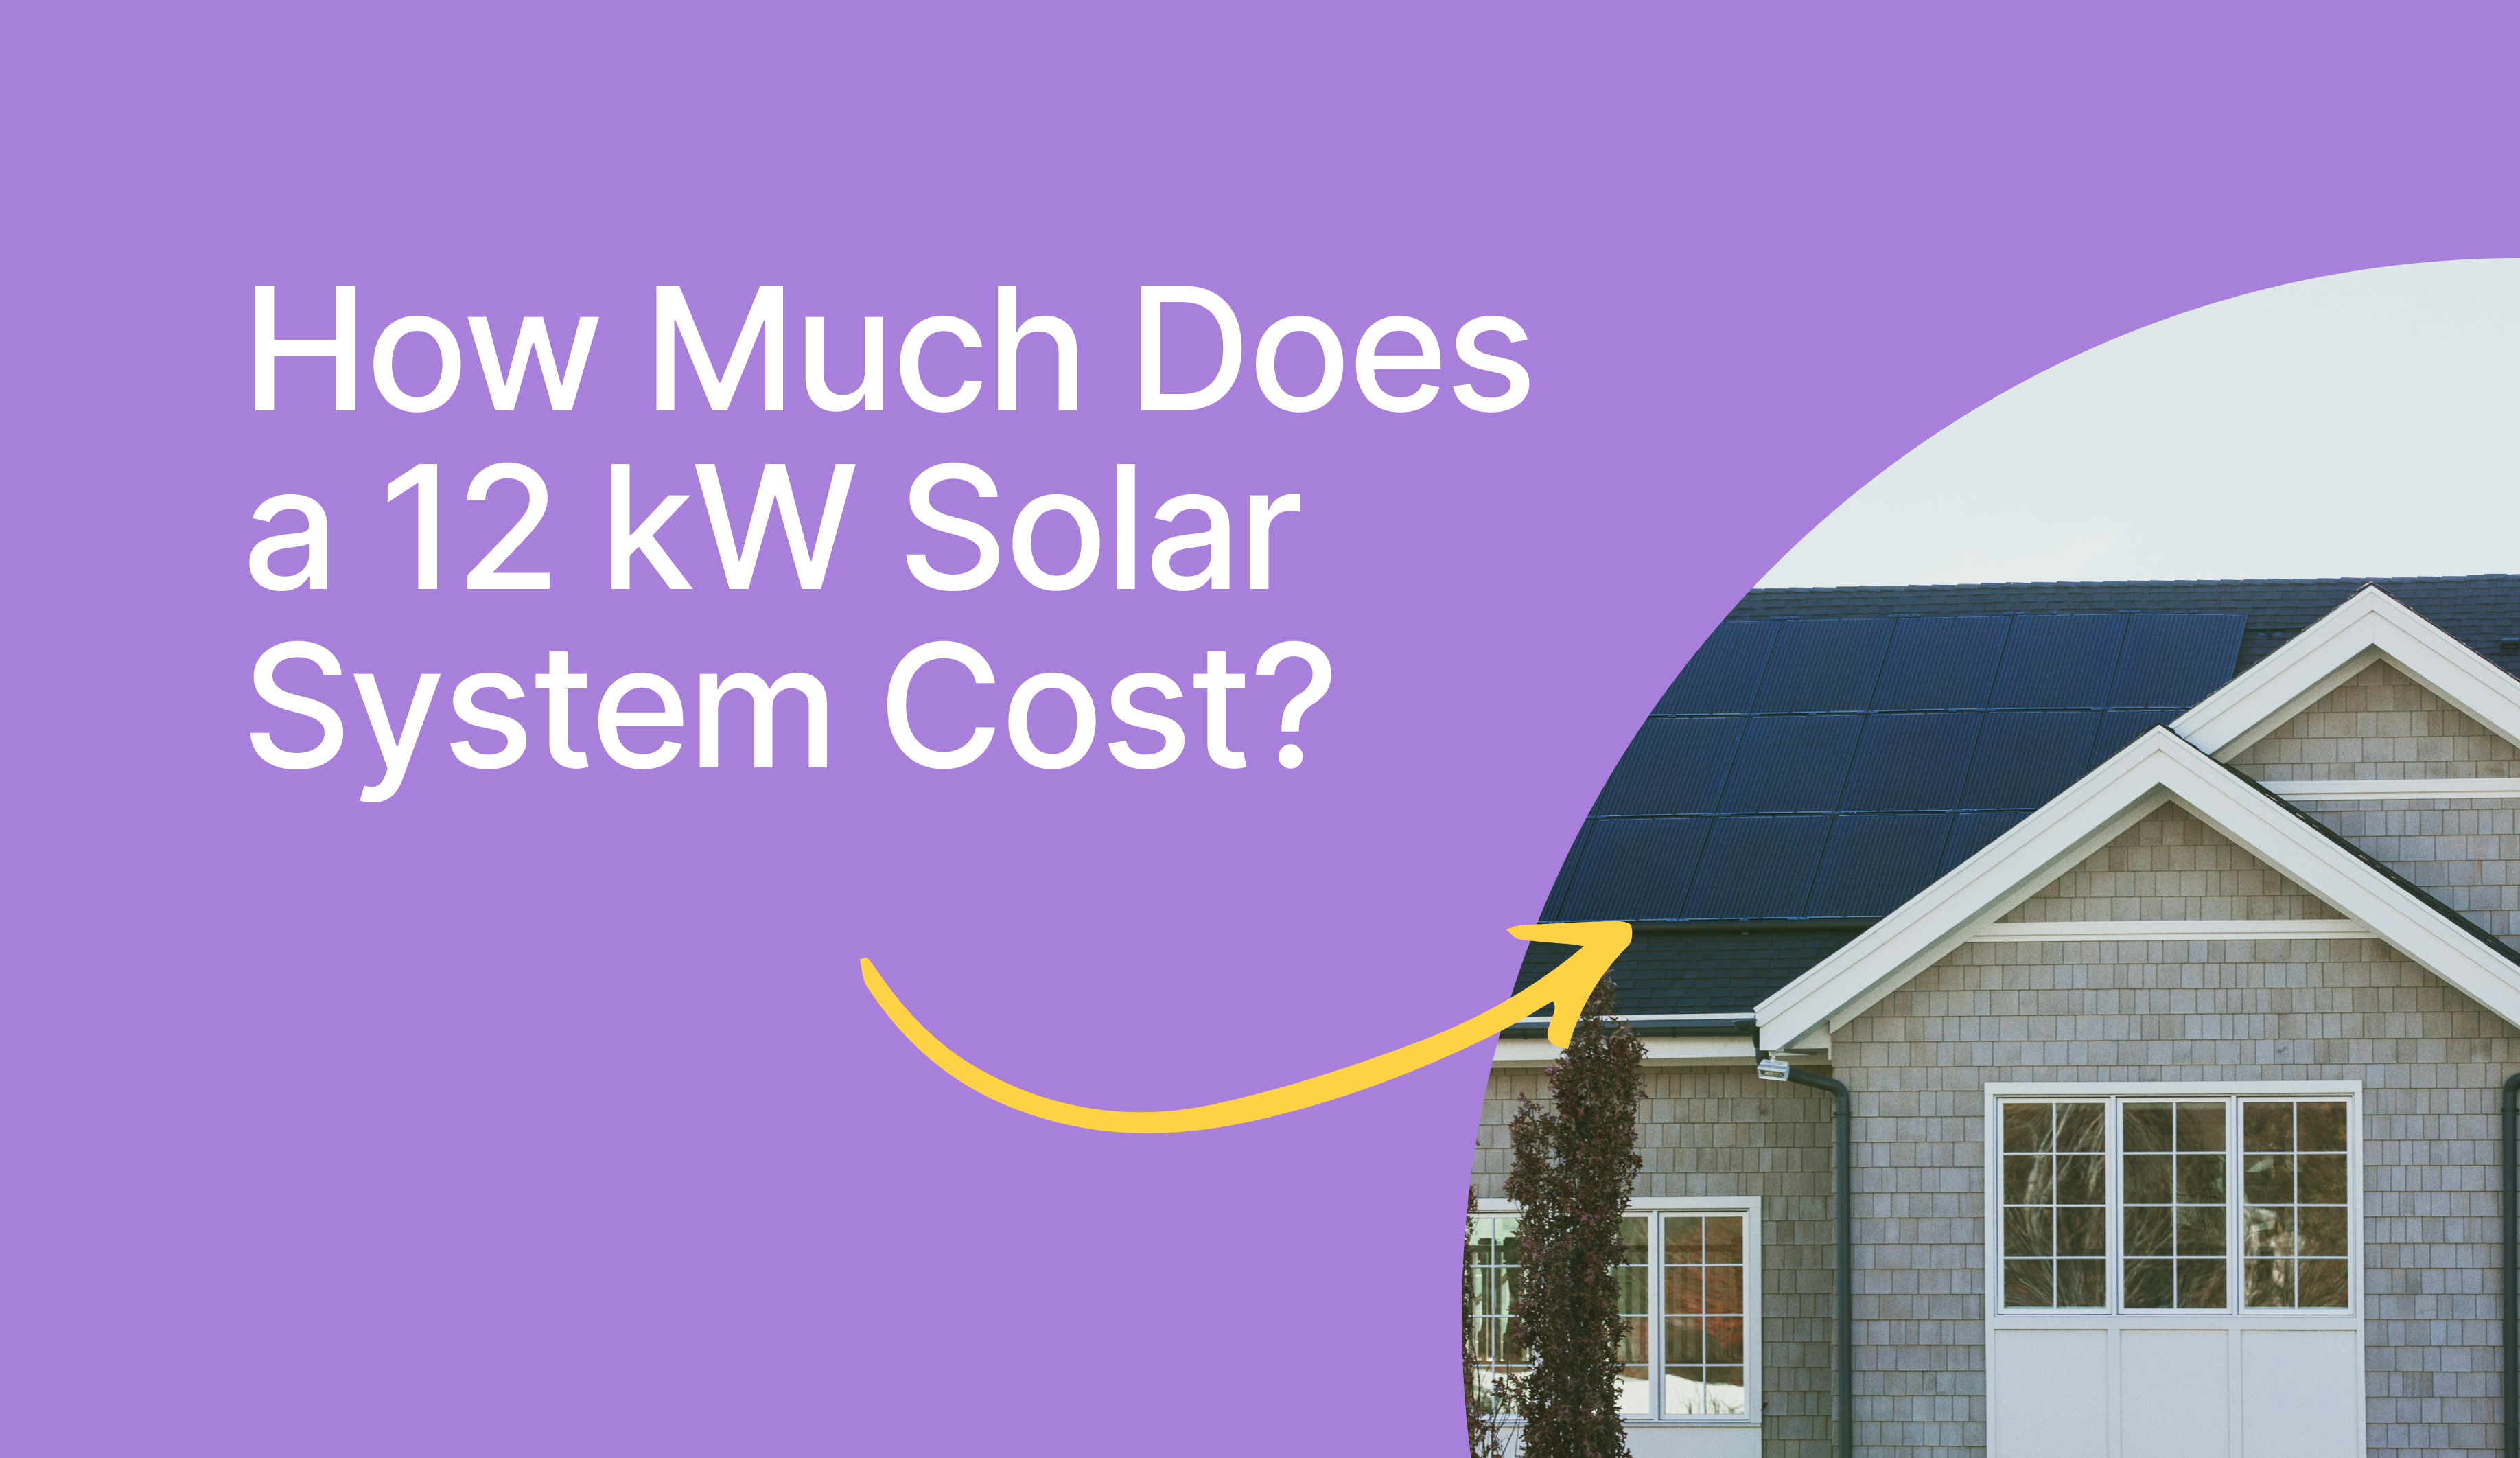 How Much Does a 12 kW Solar System Cost?